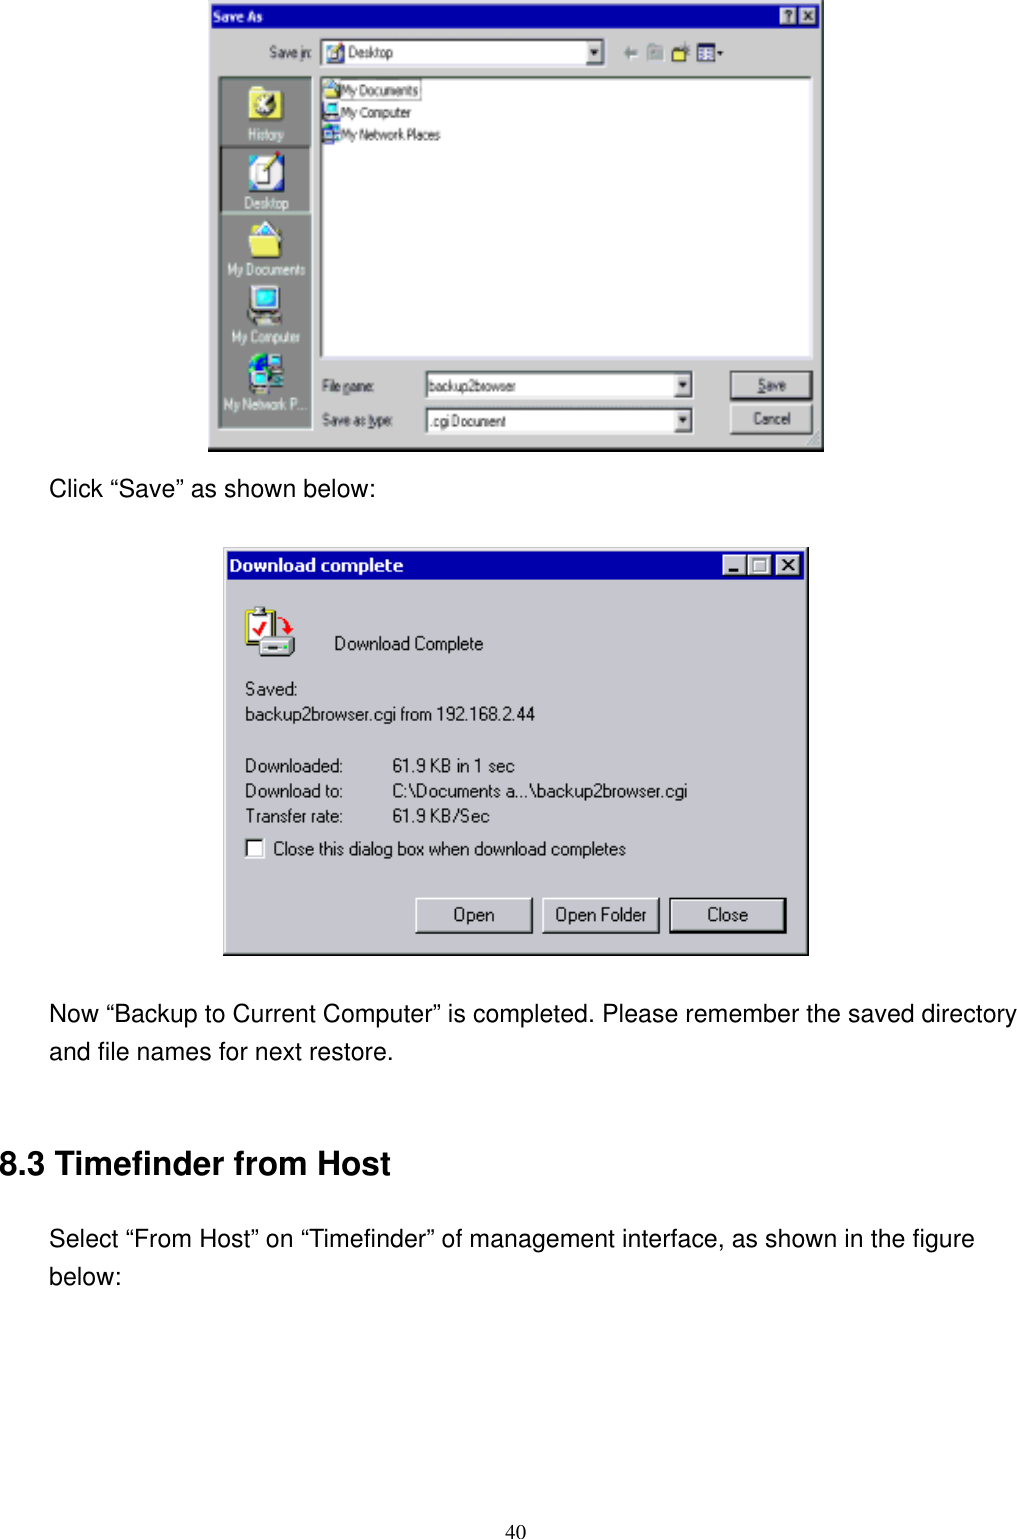  40 Click “Save” as shown below:    Now “Backup to Current Computer” is completed. Please remember the saved directory and file names for next restore.    8.3 Timefinder from Host Select “From Host” on “Timefinder” of management interface, as shown in the figure below:  